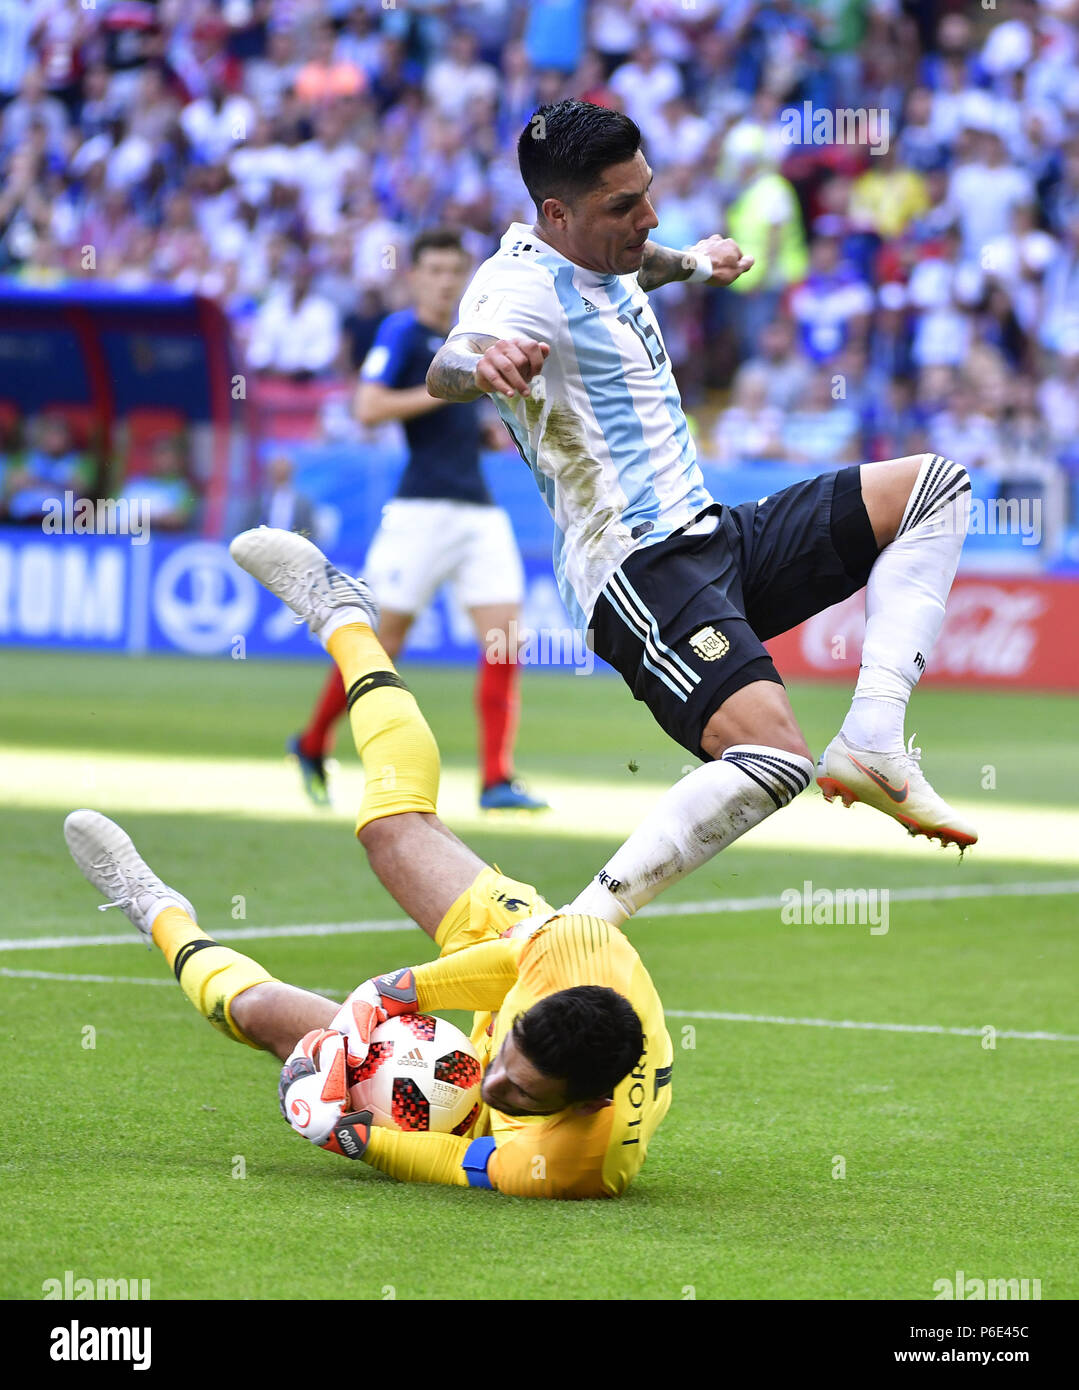 (180630) -- KAZAN, June 30, 2018 (Xinhua) -- Enzo Perez (top) of Argentina vies with goalkeeper Hugo Lloris of France during the 2018 FIFA World Cup round of 16 match between France and Argentina in Kazan, Russia, on June 30, 2018. (Xinhua/Chen Yichen) Stock Photo